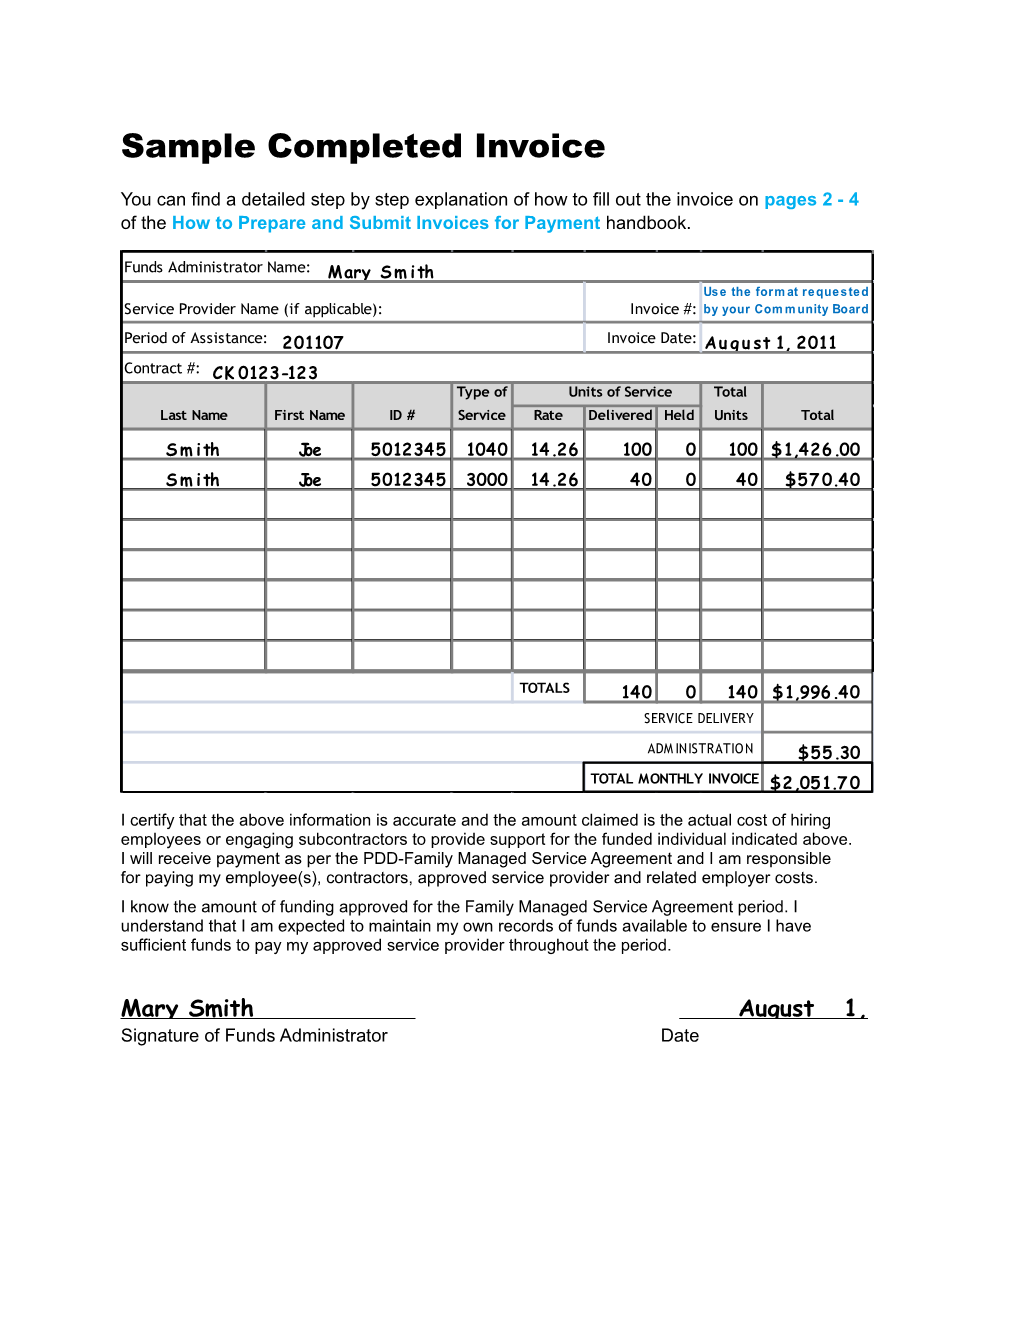 How to Prepare and Submit Invoices for Payment: Sample Completed Invoice